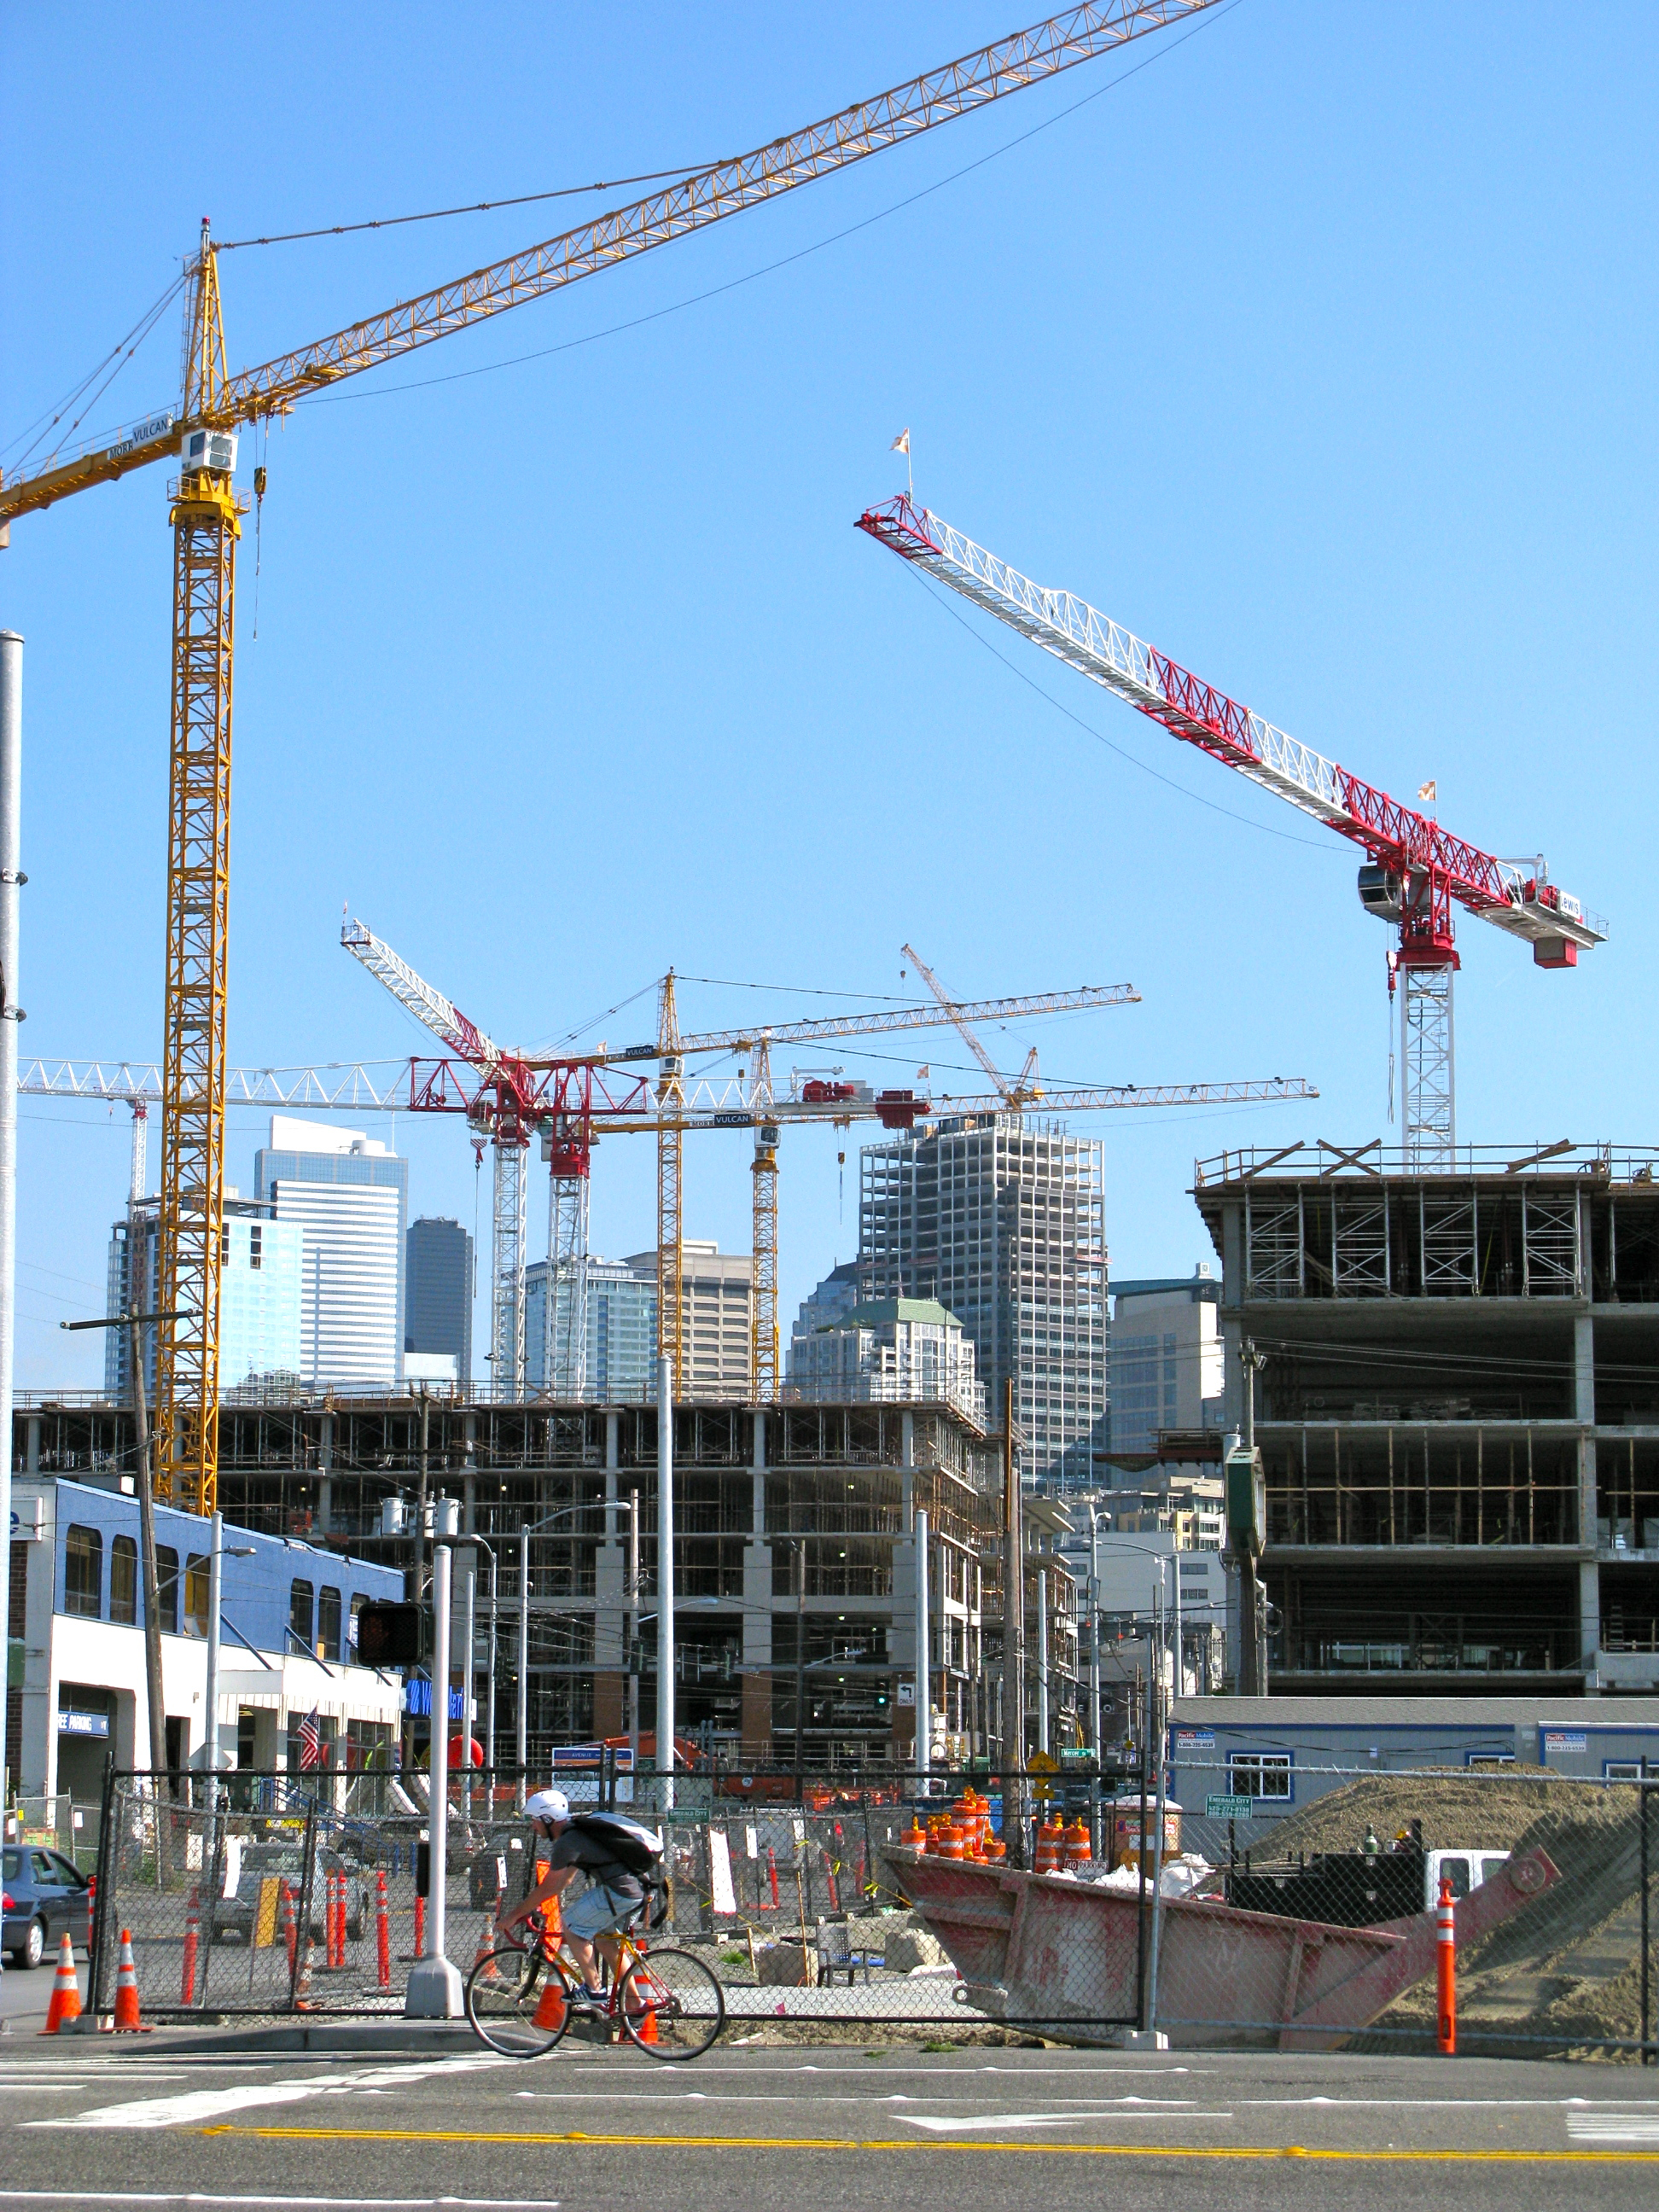 A number of cranes over buildings, with a view of Downtown Seattle